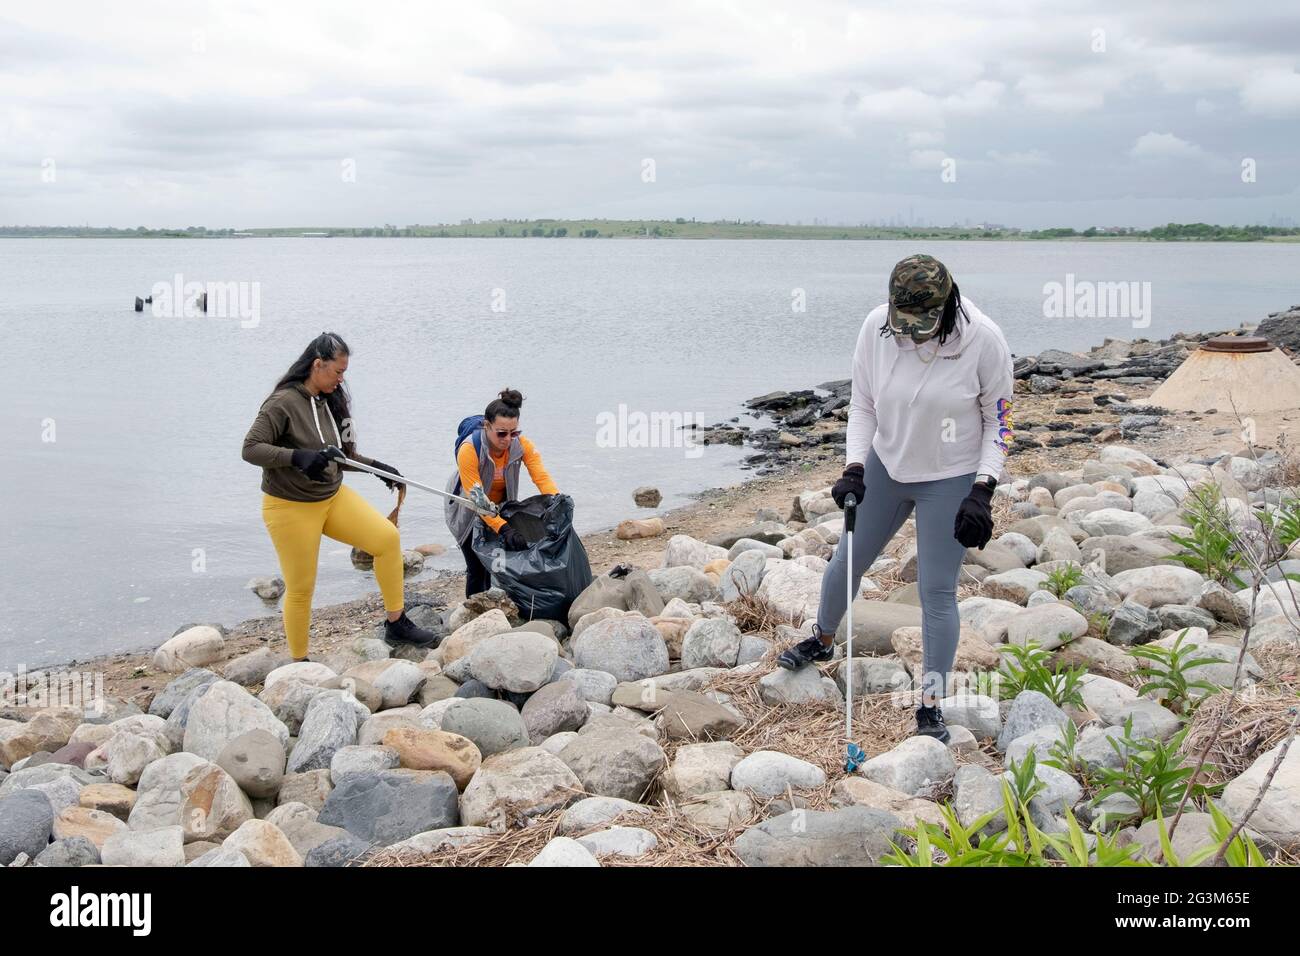 Volunteers clean the beach at Jamaica Bay in Queens as part of the 2021 Project Prithvi Beach Cleanup. Imn Queens, New York City. Stock Photo